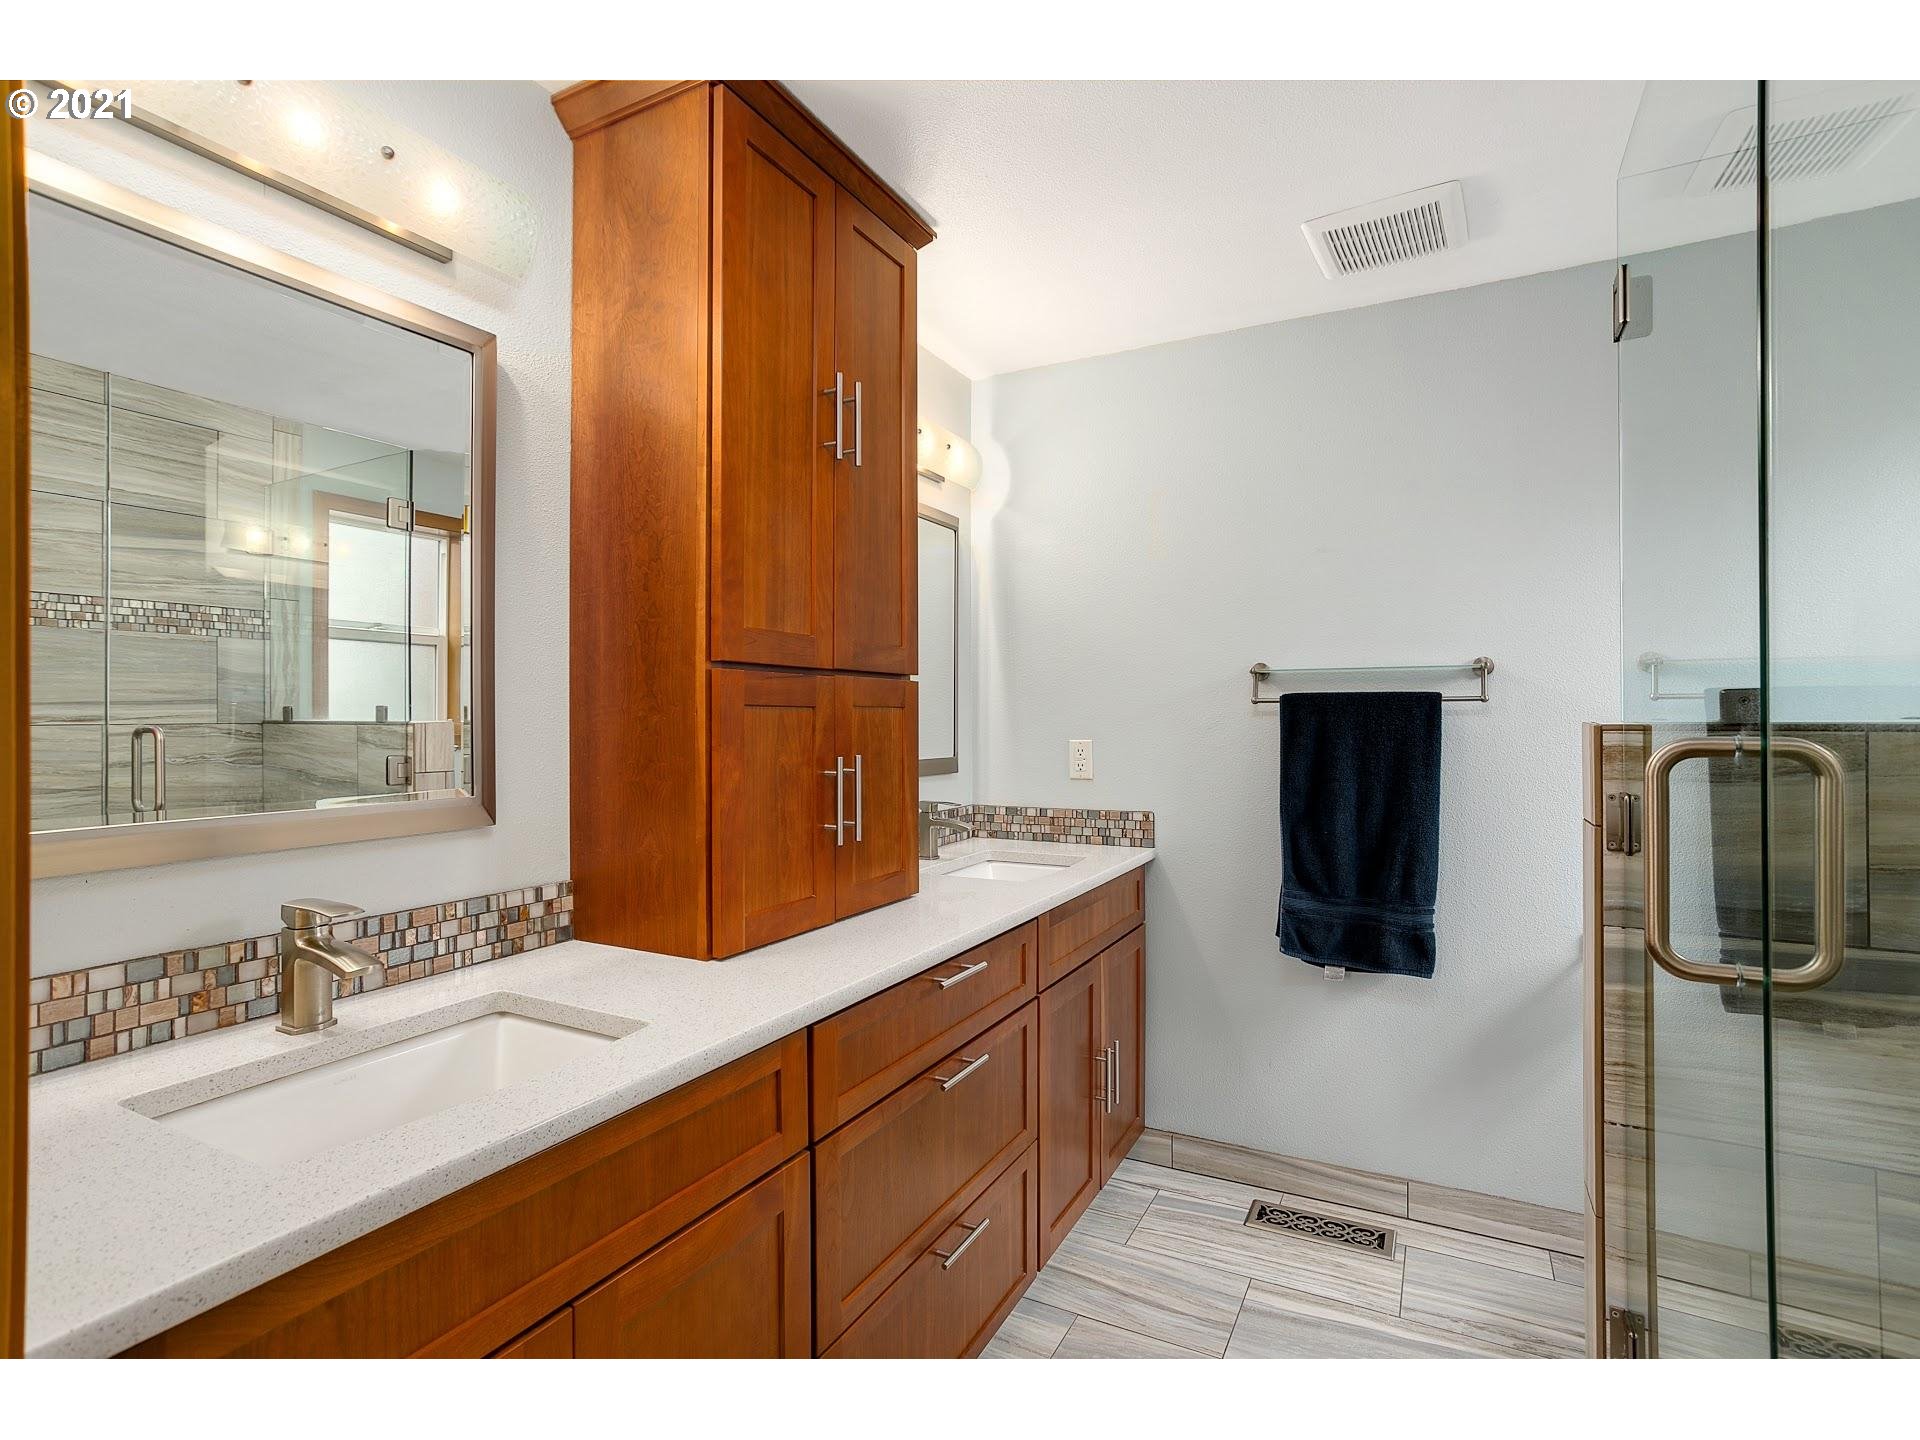 Attached Bathroom-Double Sinks